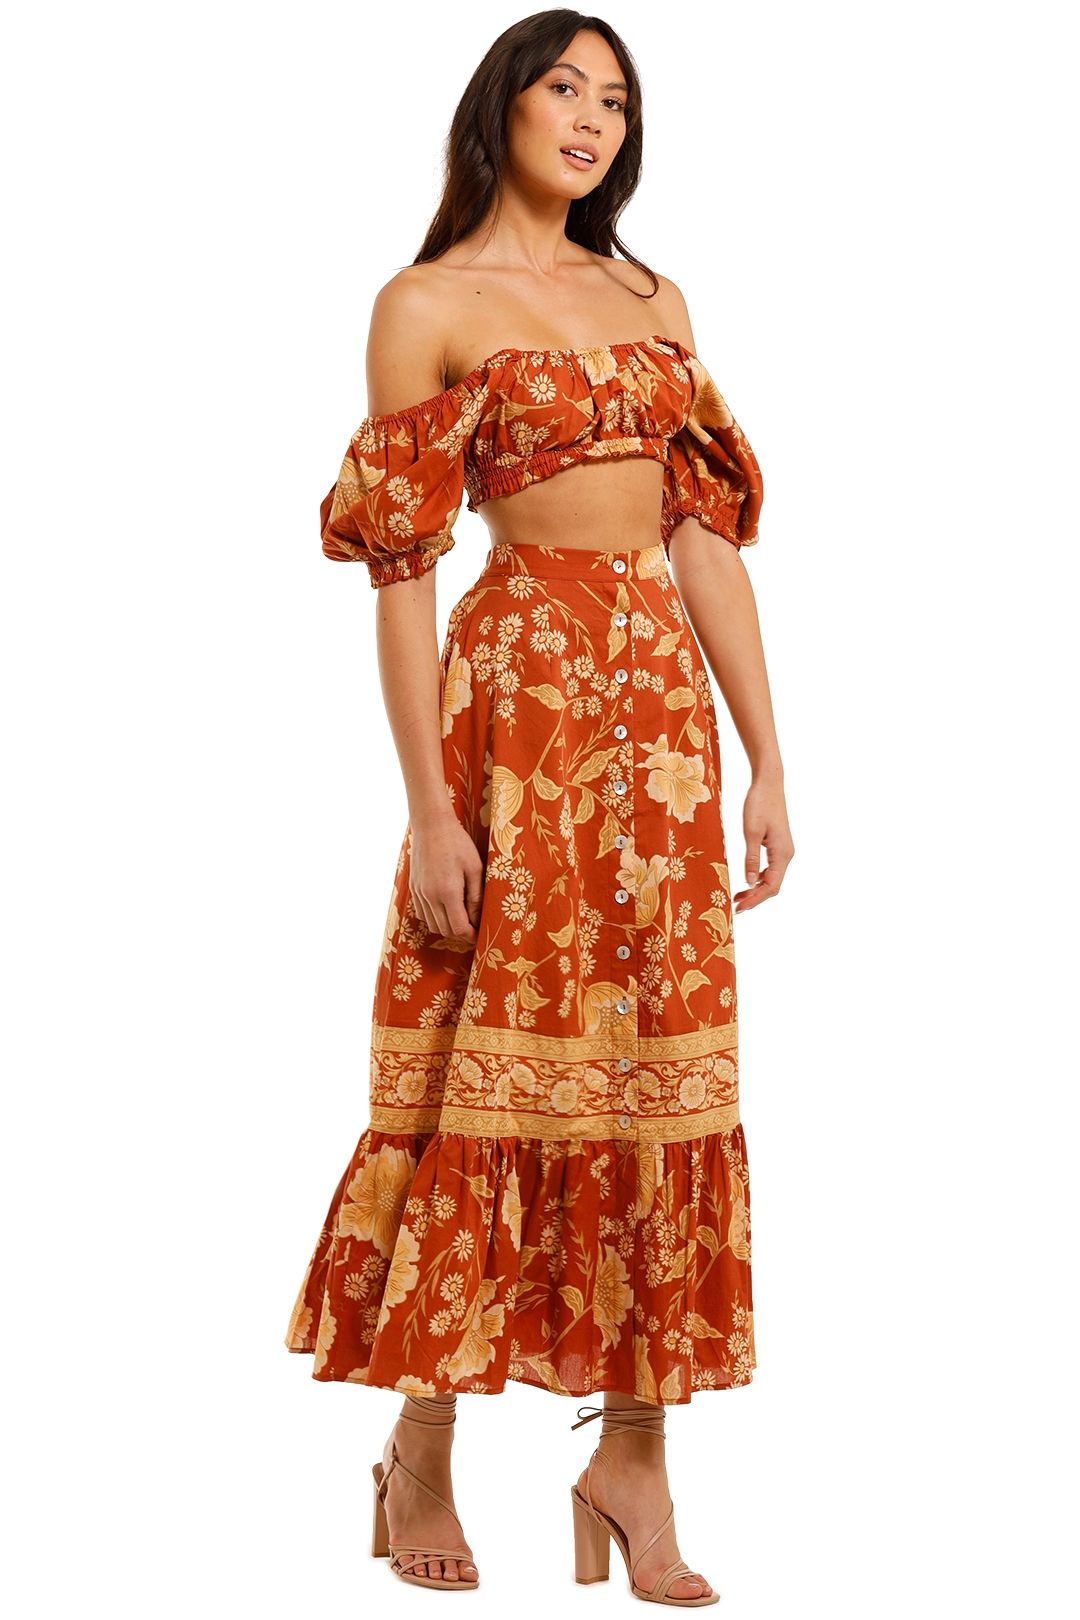 Sloan Cropped Top and Skirt Set Ochre Floral